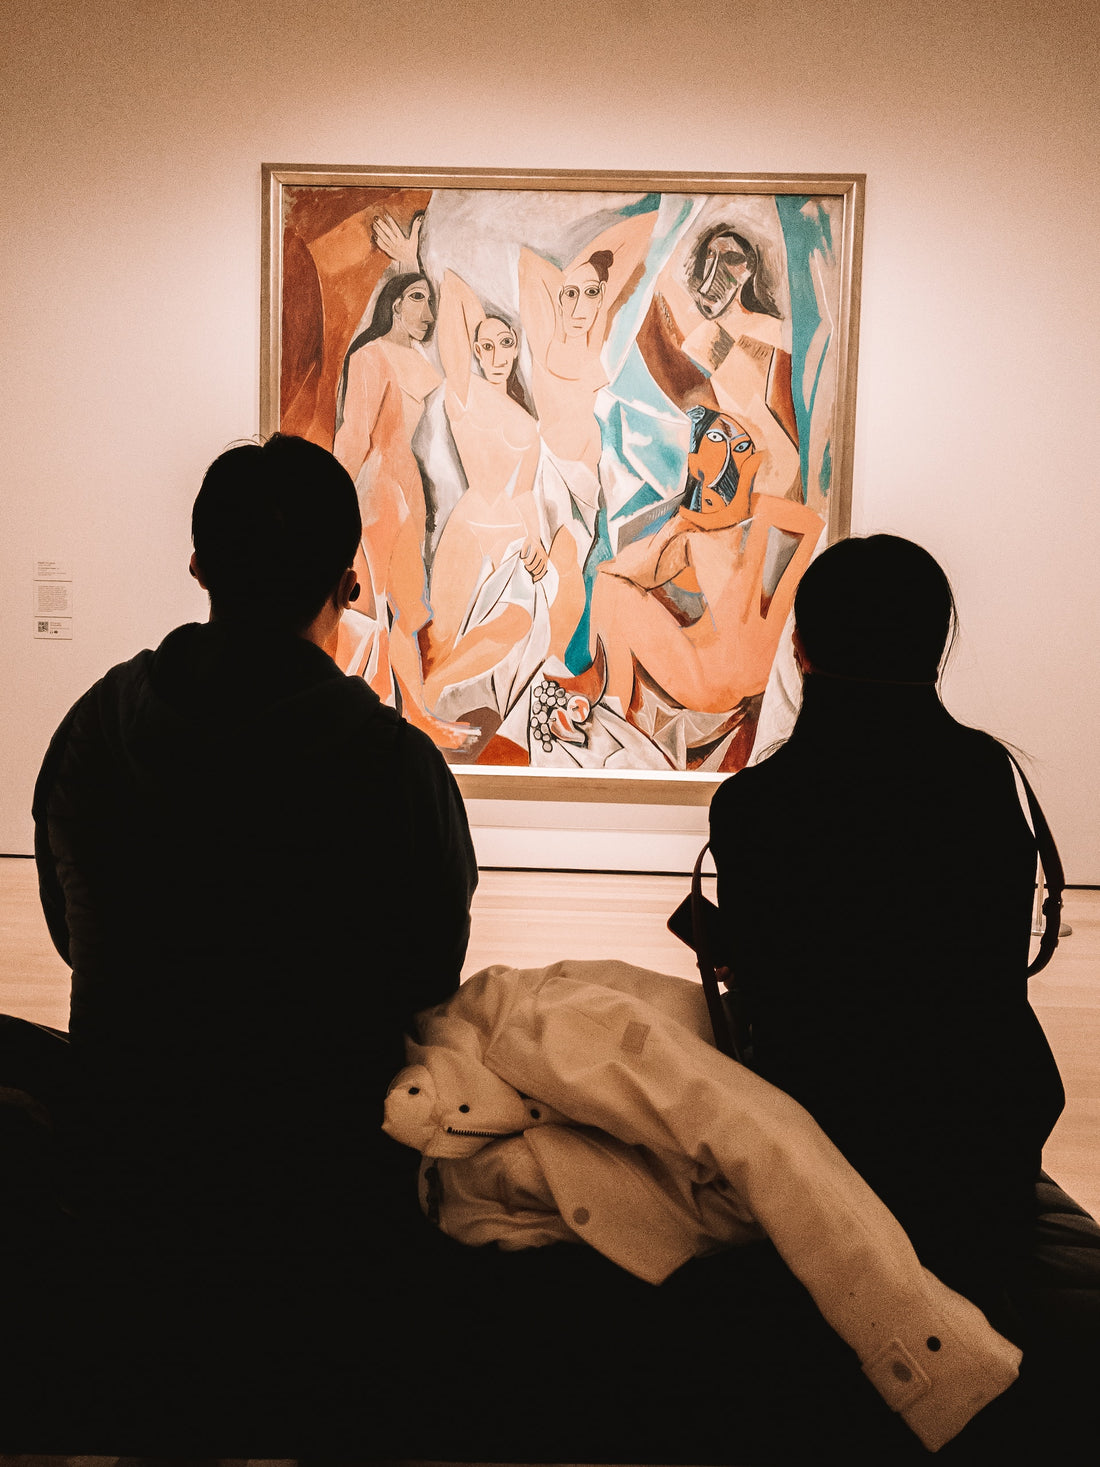 Picasso's Women: An Artistic Exploration through the Lens of Cubism